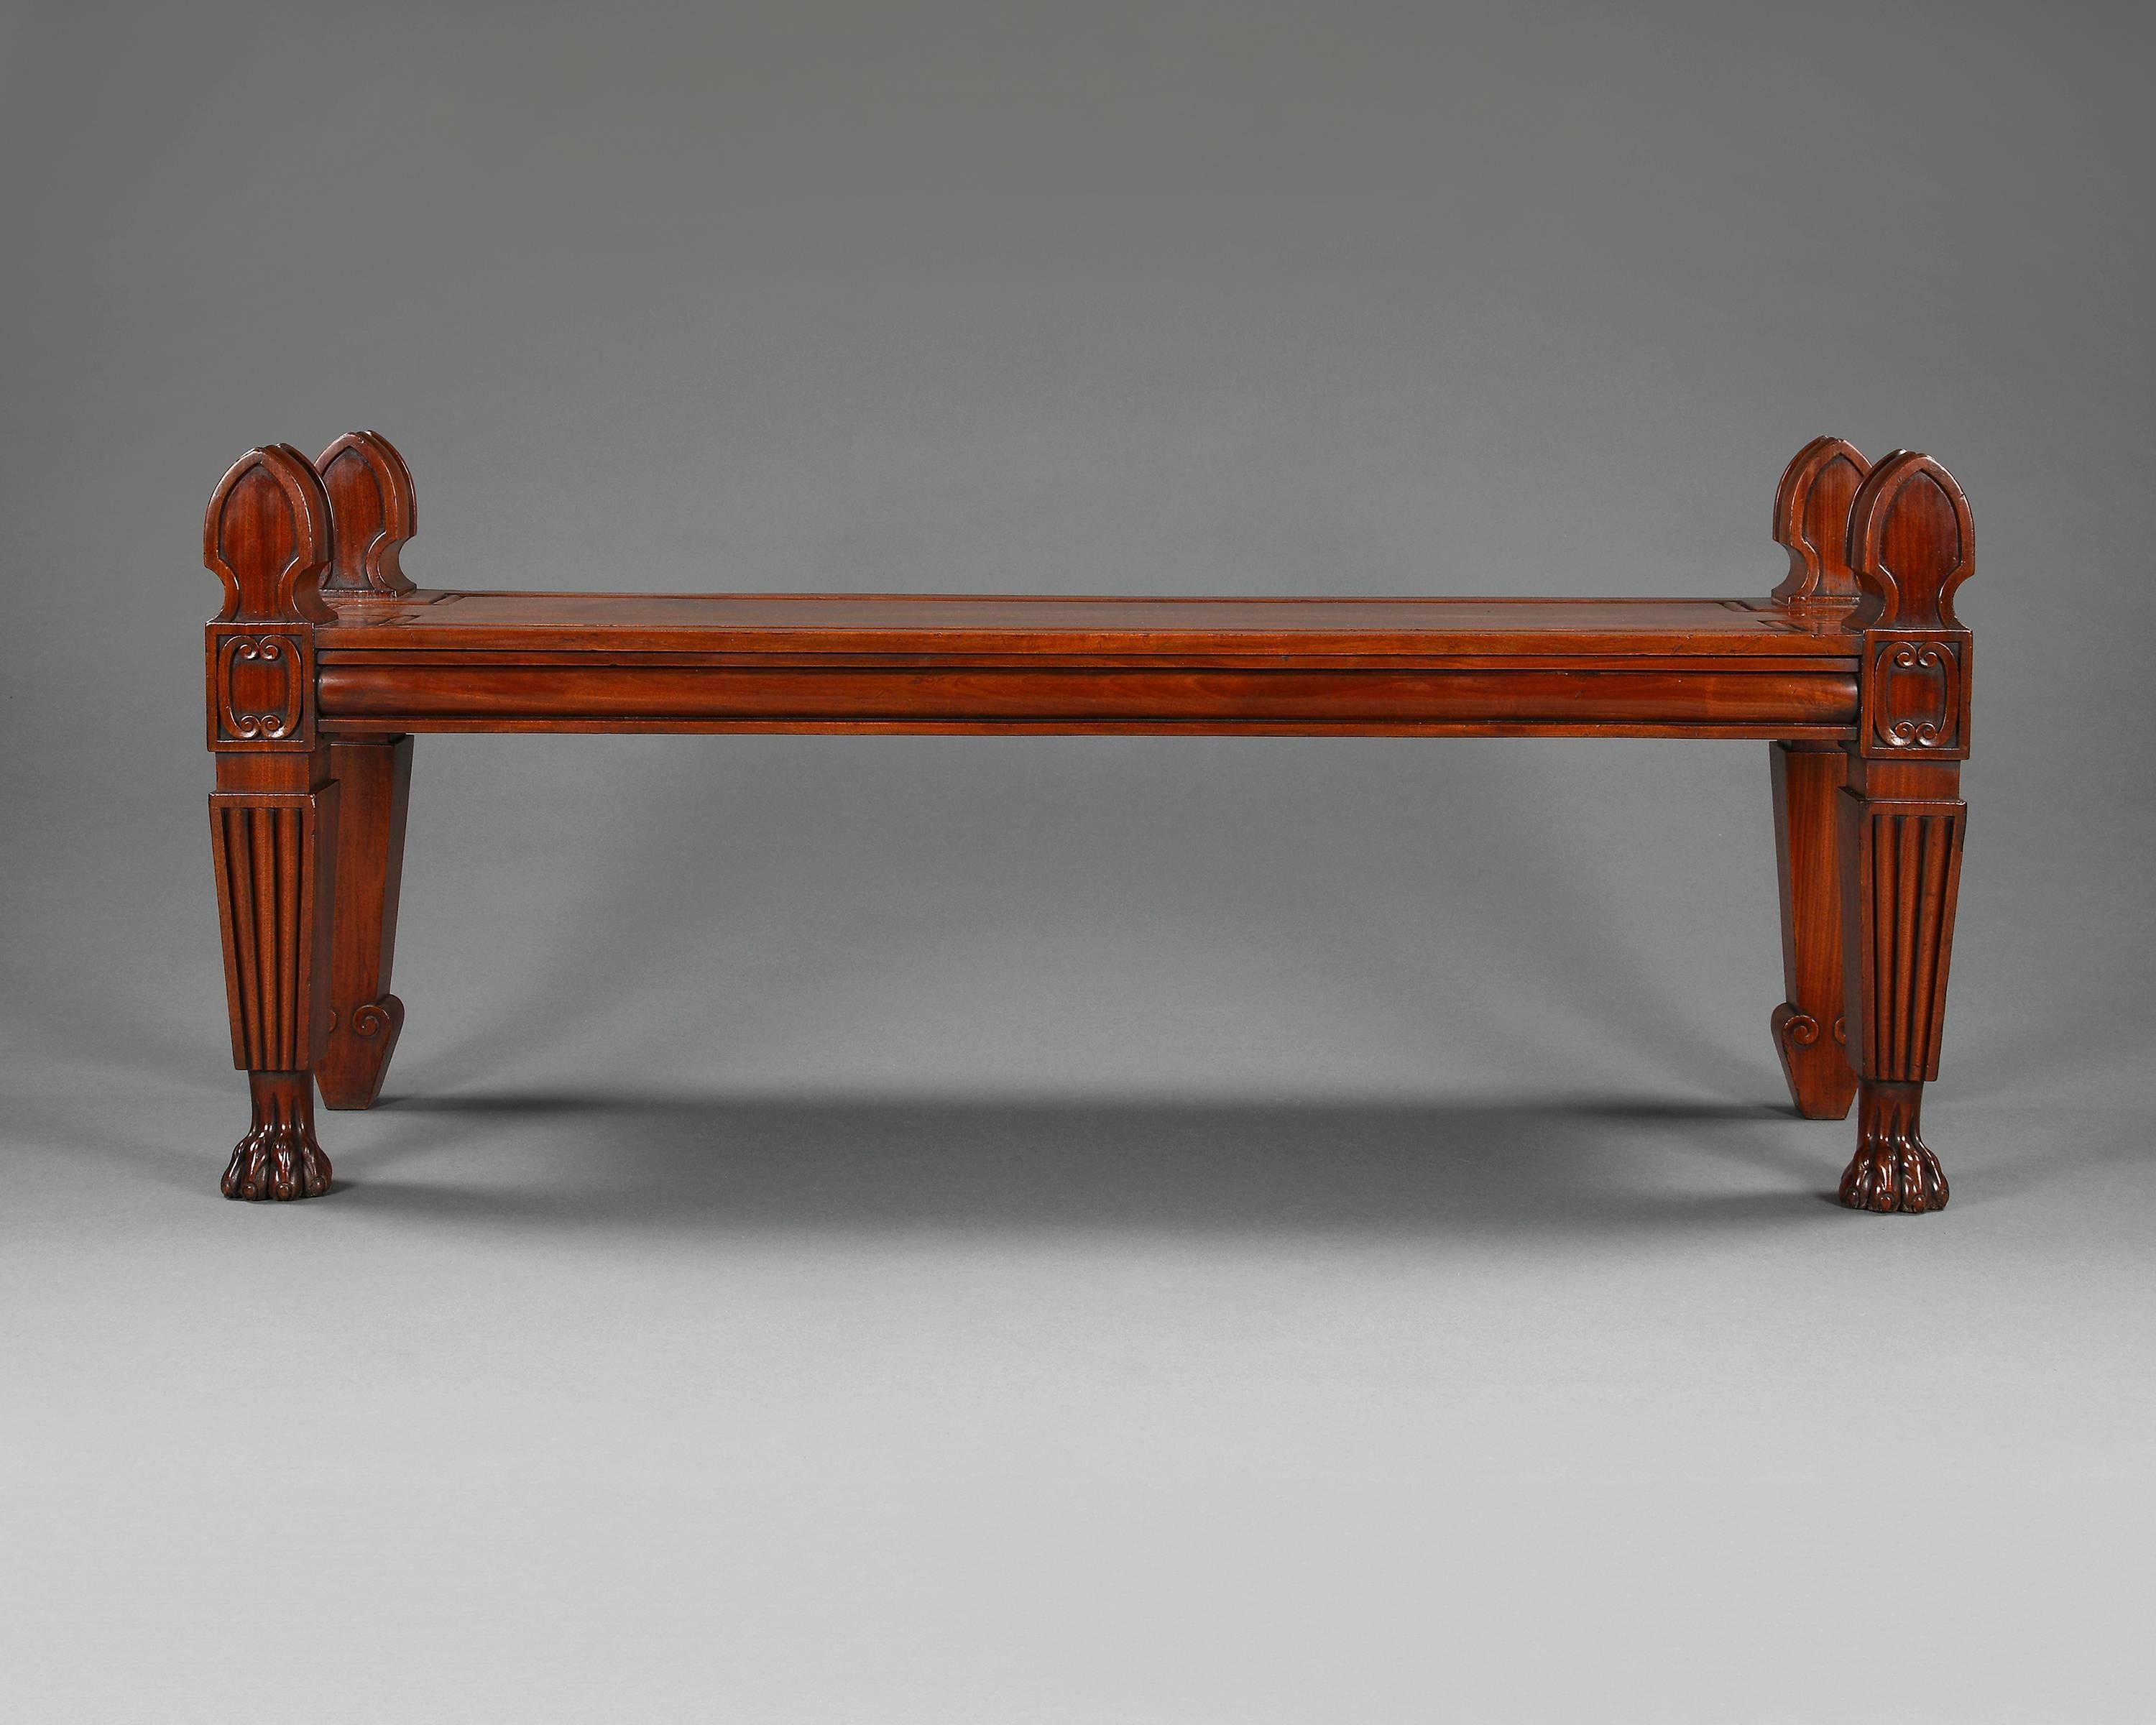 Very smart and stylish mahogany hall bench in the classical manner 'Roman', with a one piece panelled rectangular seat, square tapered legs, the front legs have a reeded section and raised on paw feet.